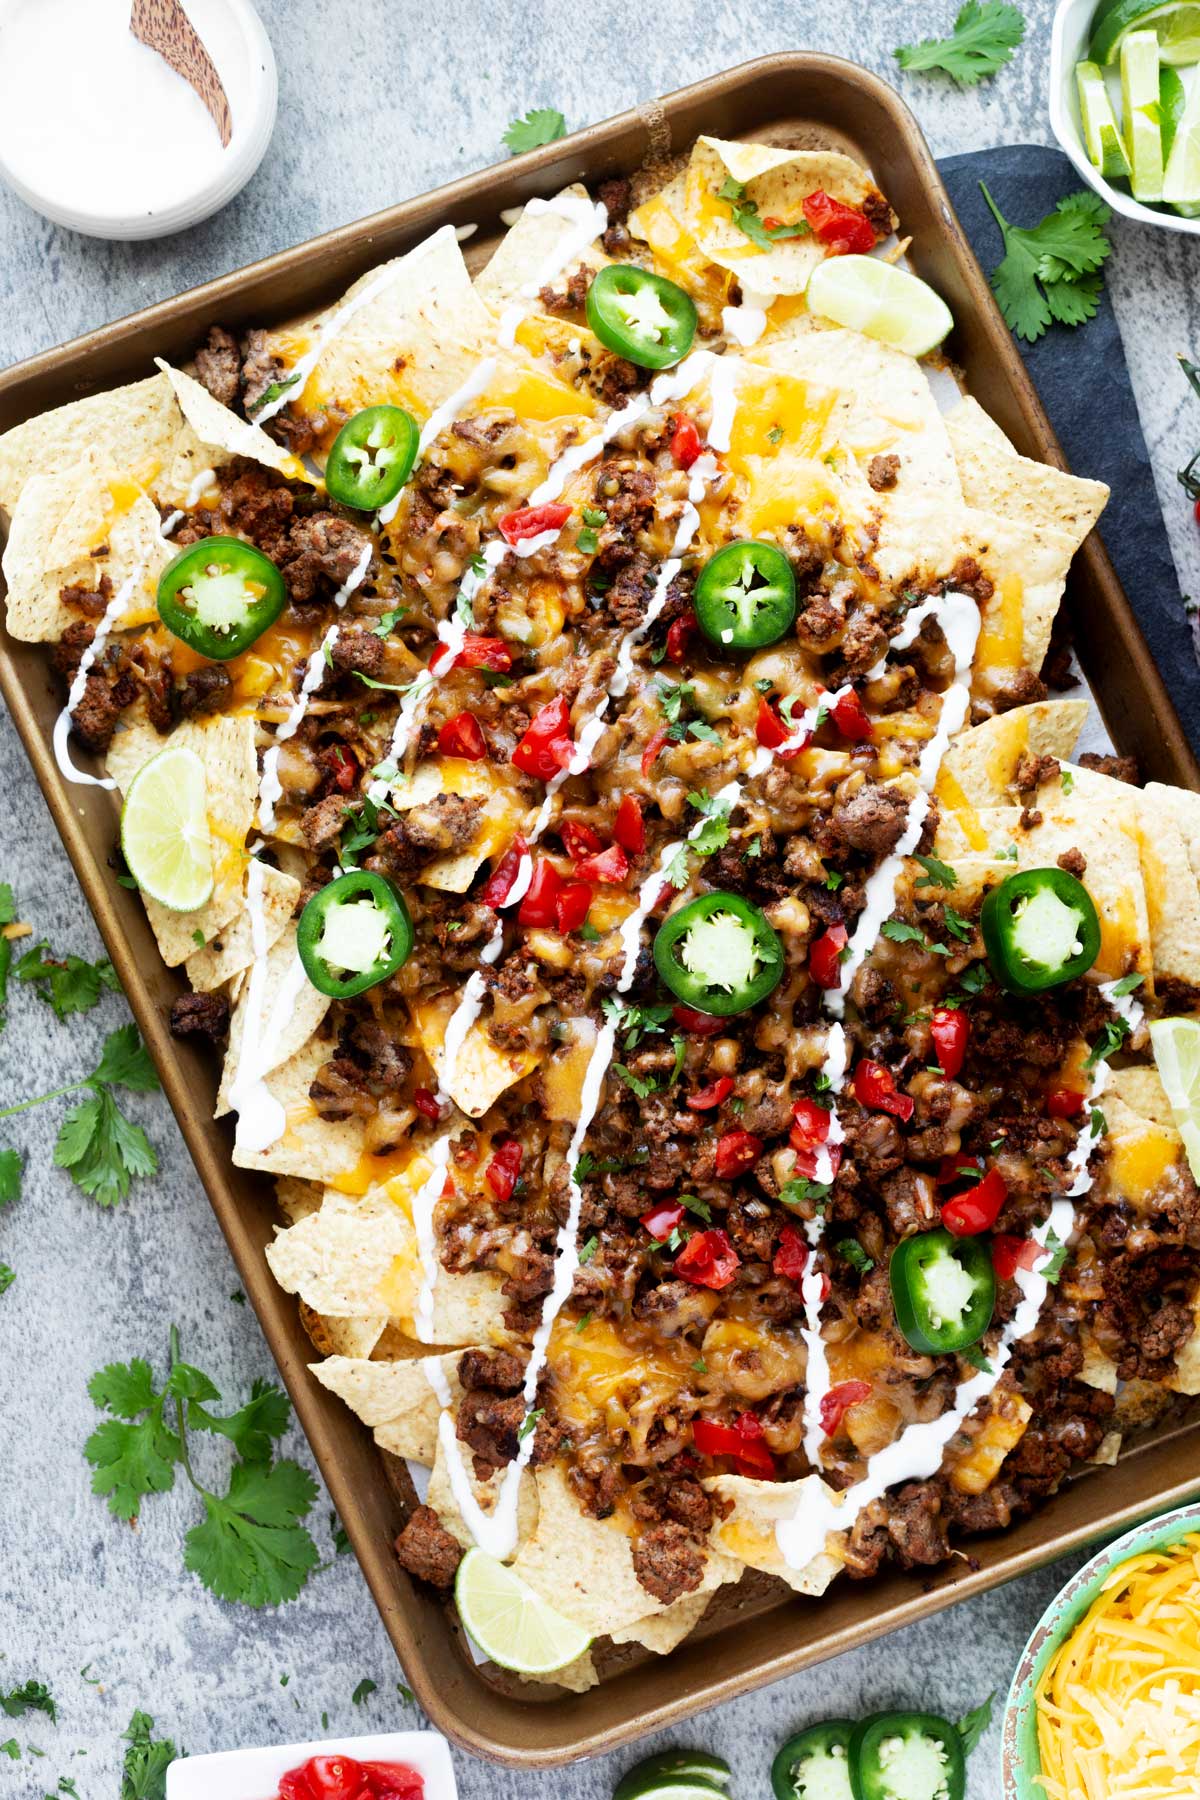 Overhead photo of a sheet pan with Blackstone nachos garnished with sour cream and jalapenos.